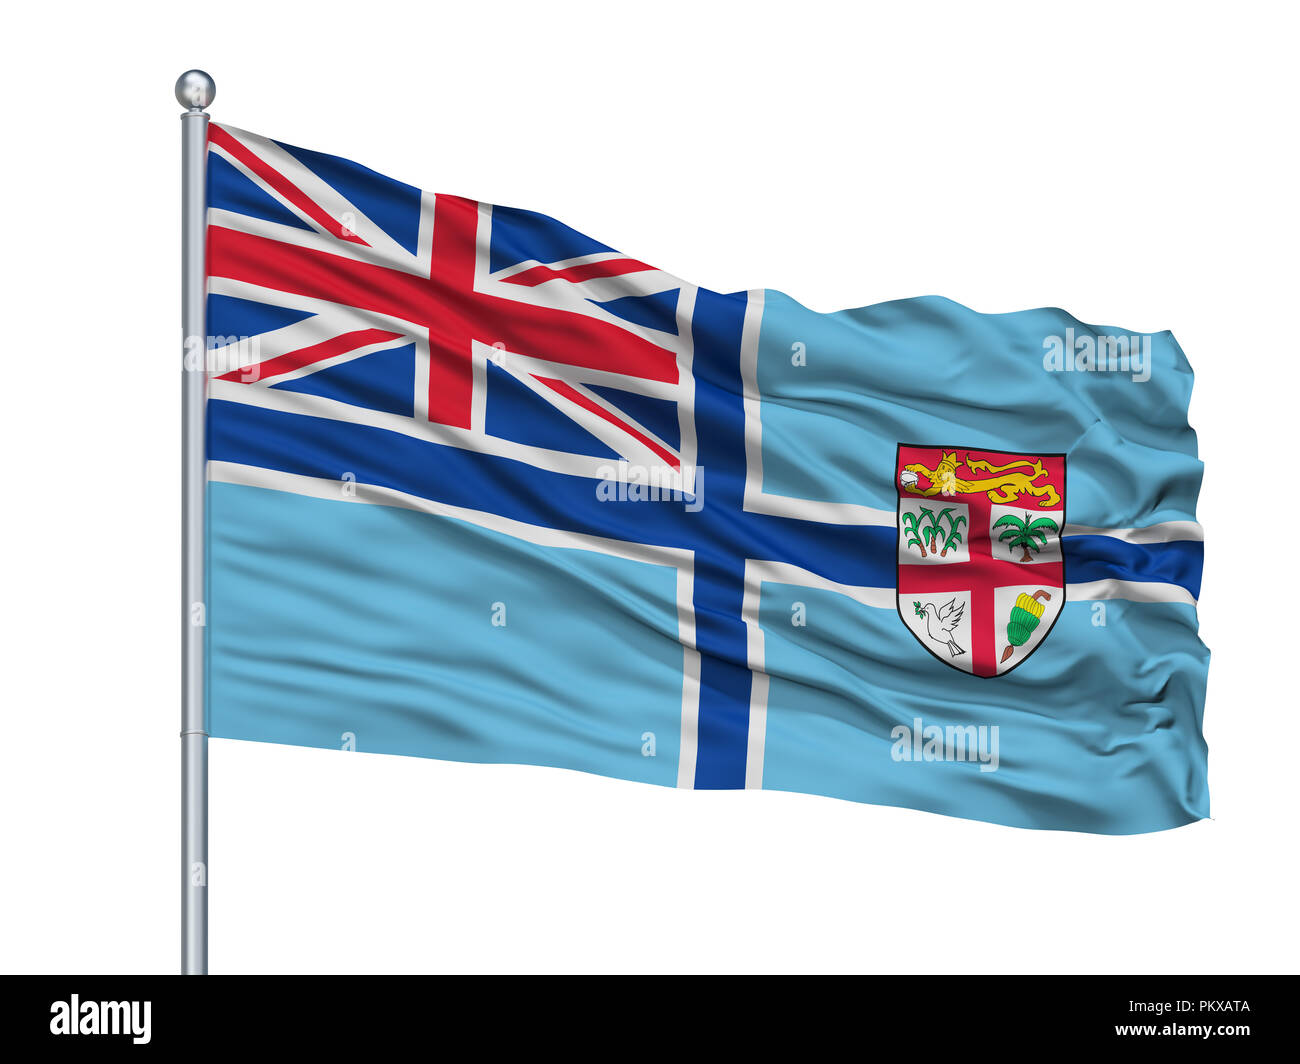 Civil Air Ensign Of Fiji Flag On Flagpole, Isolated On White Background, 3D Rendering Stock Photo